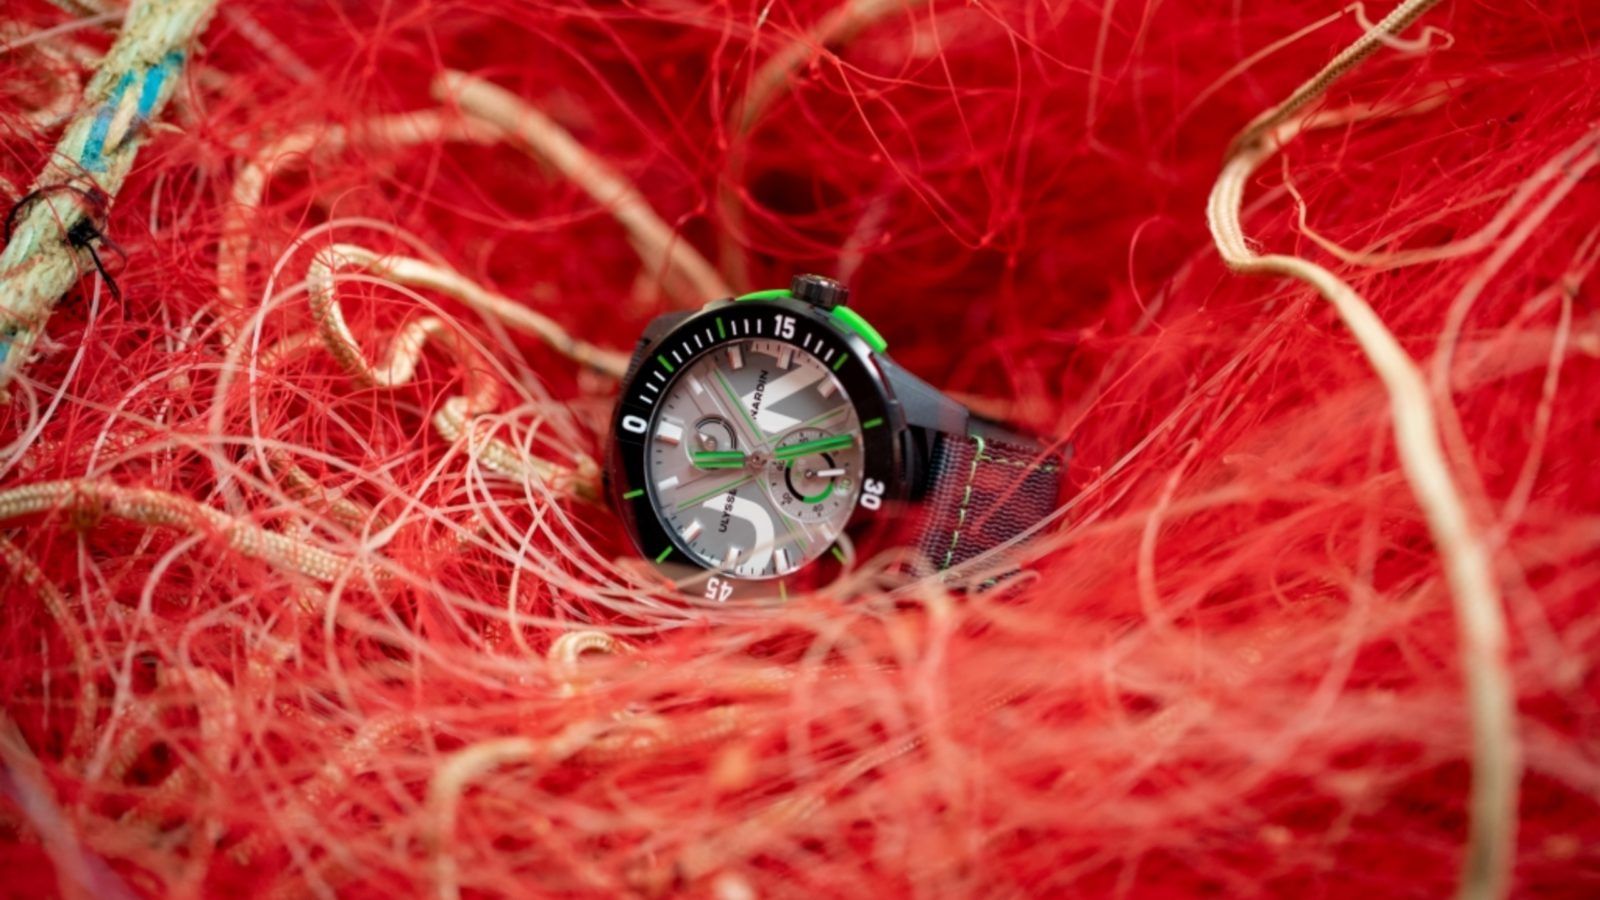 Here’s how these watch brands are embracing sustainability